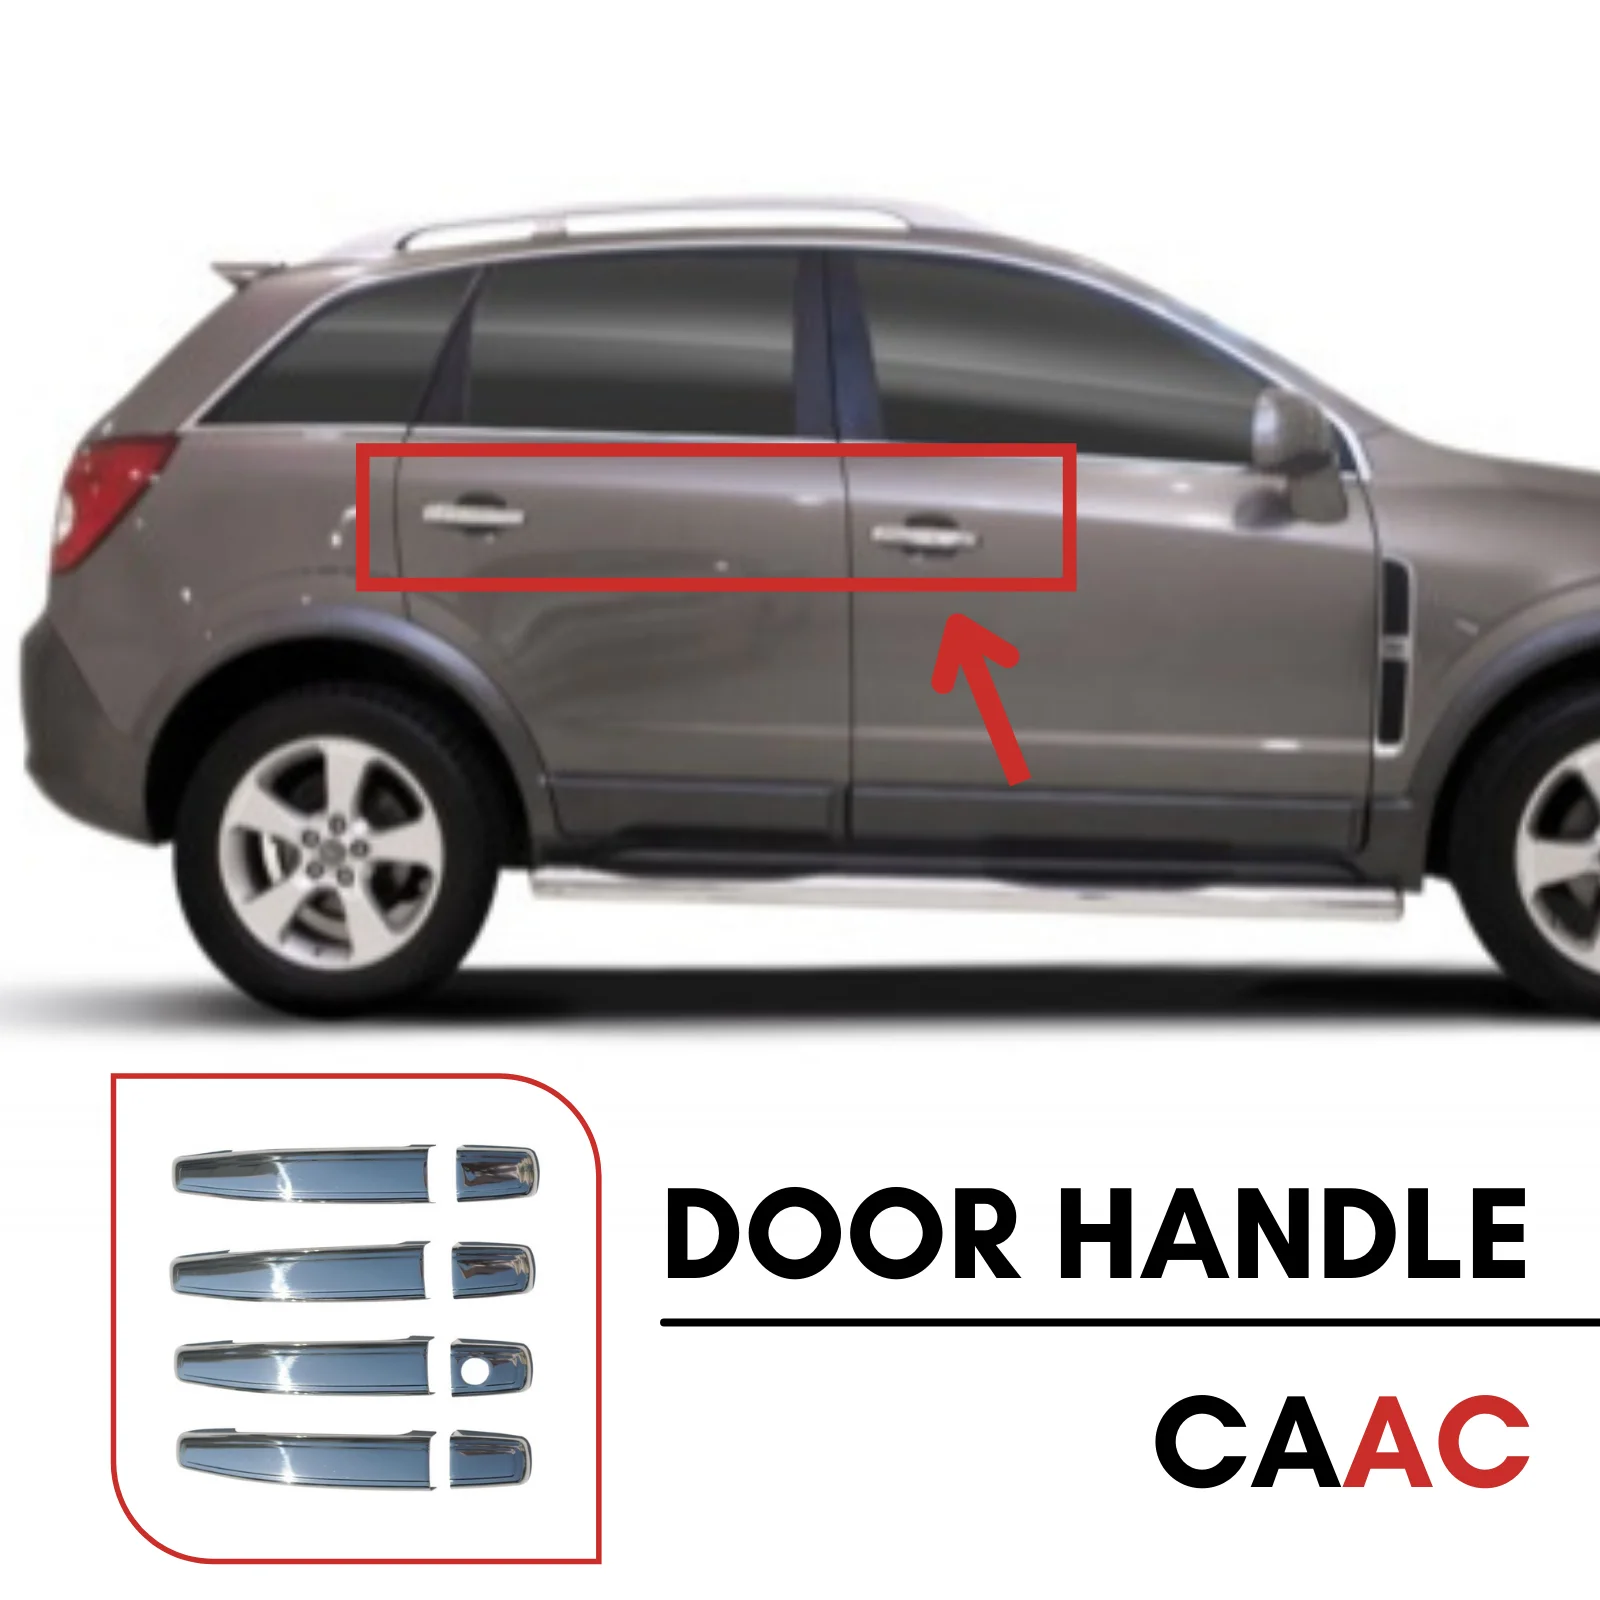 

FOR OPEL ANTARA 2007-2017 8 PCS 4 CHROME DOOR HANDLE STAINLESS STEEL DOUBLE SIDES ADHESIVE MIRROR PLATED SPECIAL MODIFIED NEW SEASON